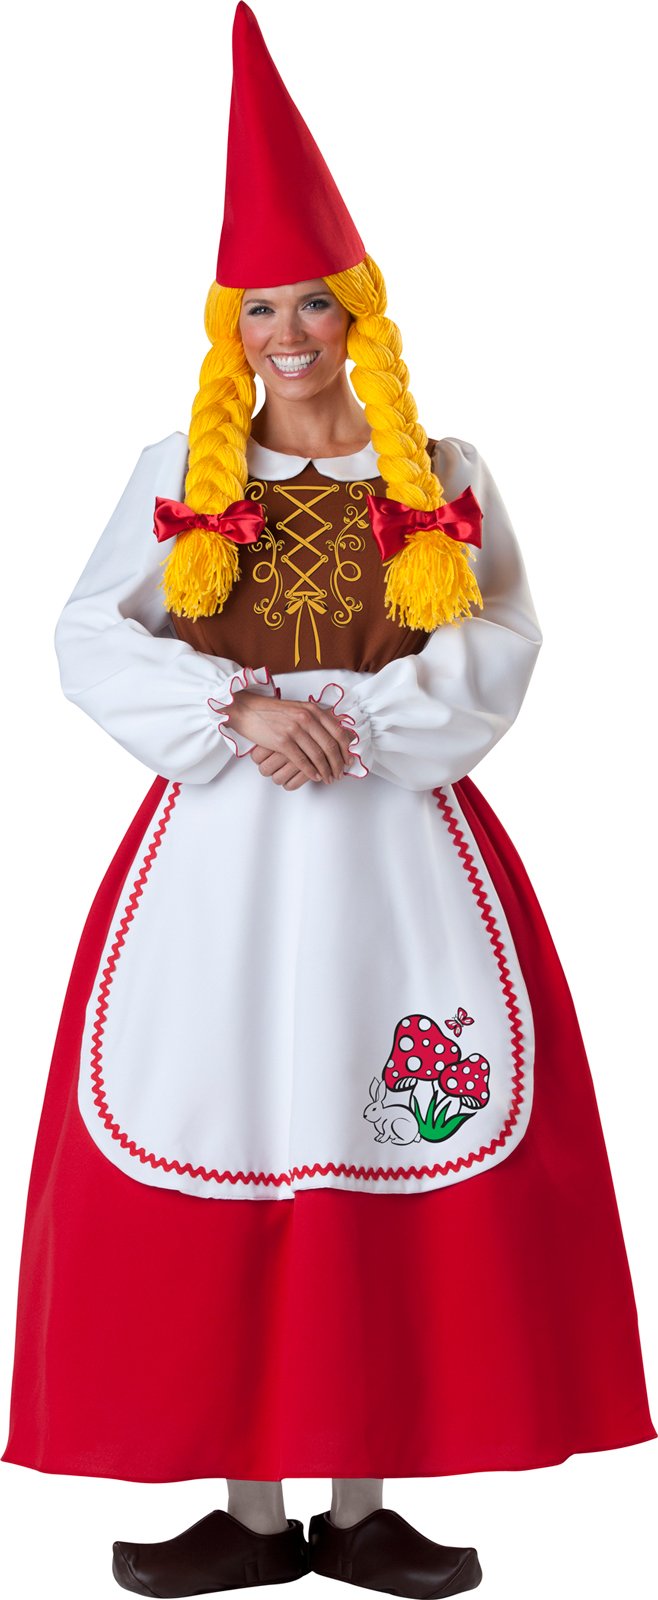 Mrs. Garden Gnome Elite Collection Adult Costume